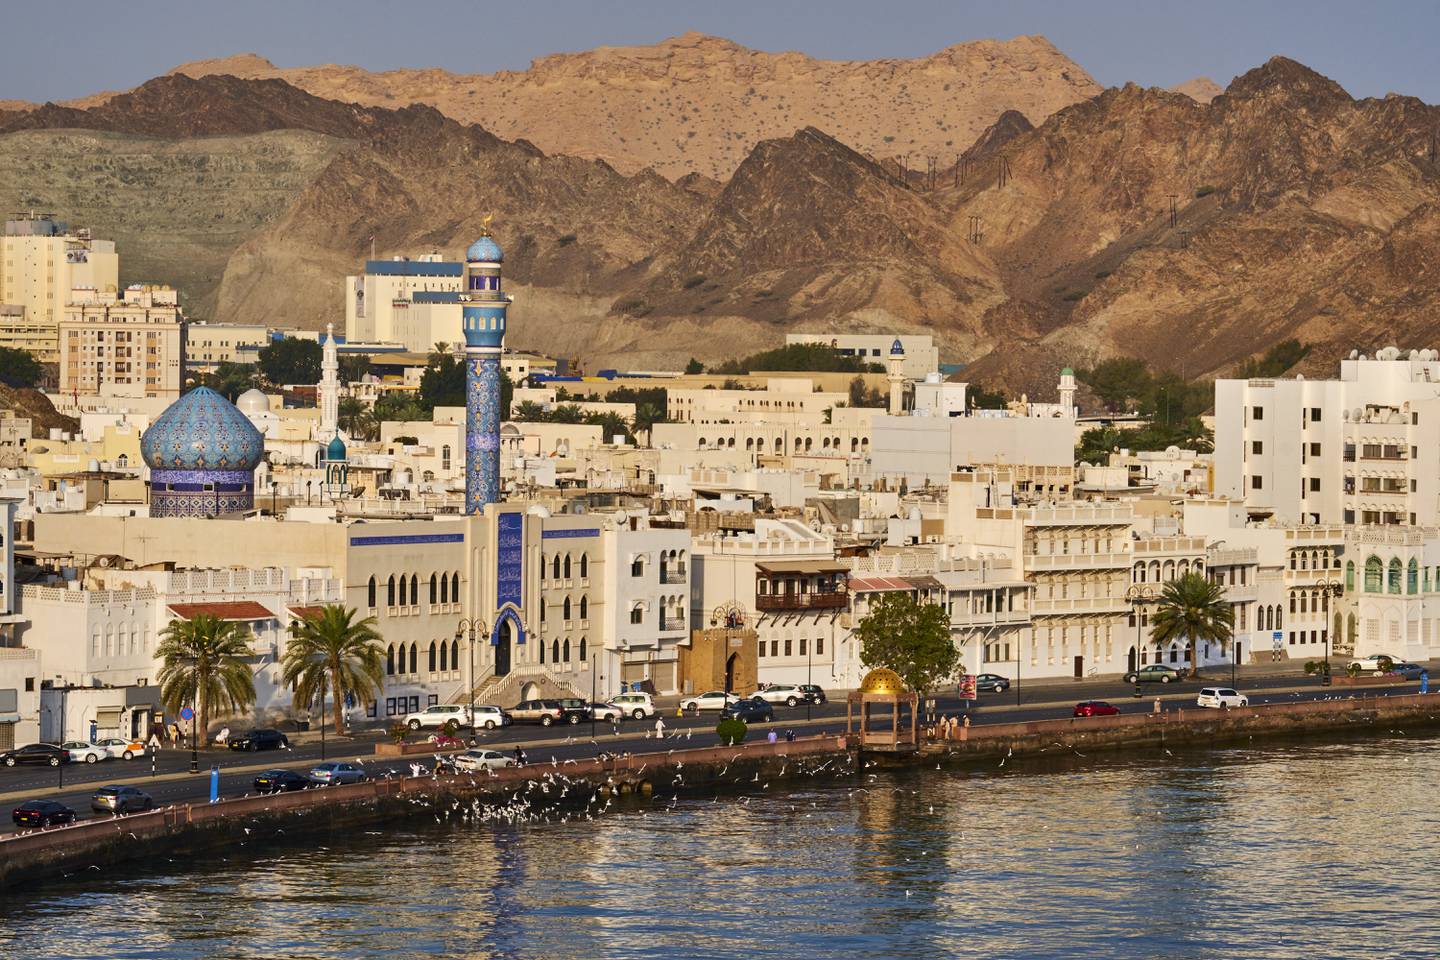 Sultanate of Oman, Muscat, the corniche of Muttrah, the old town of Muscat, waterfront building